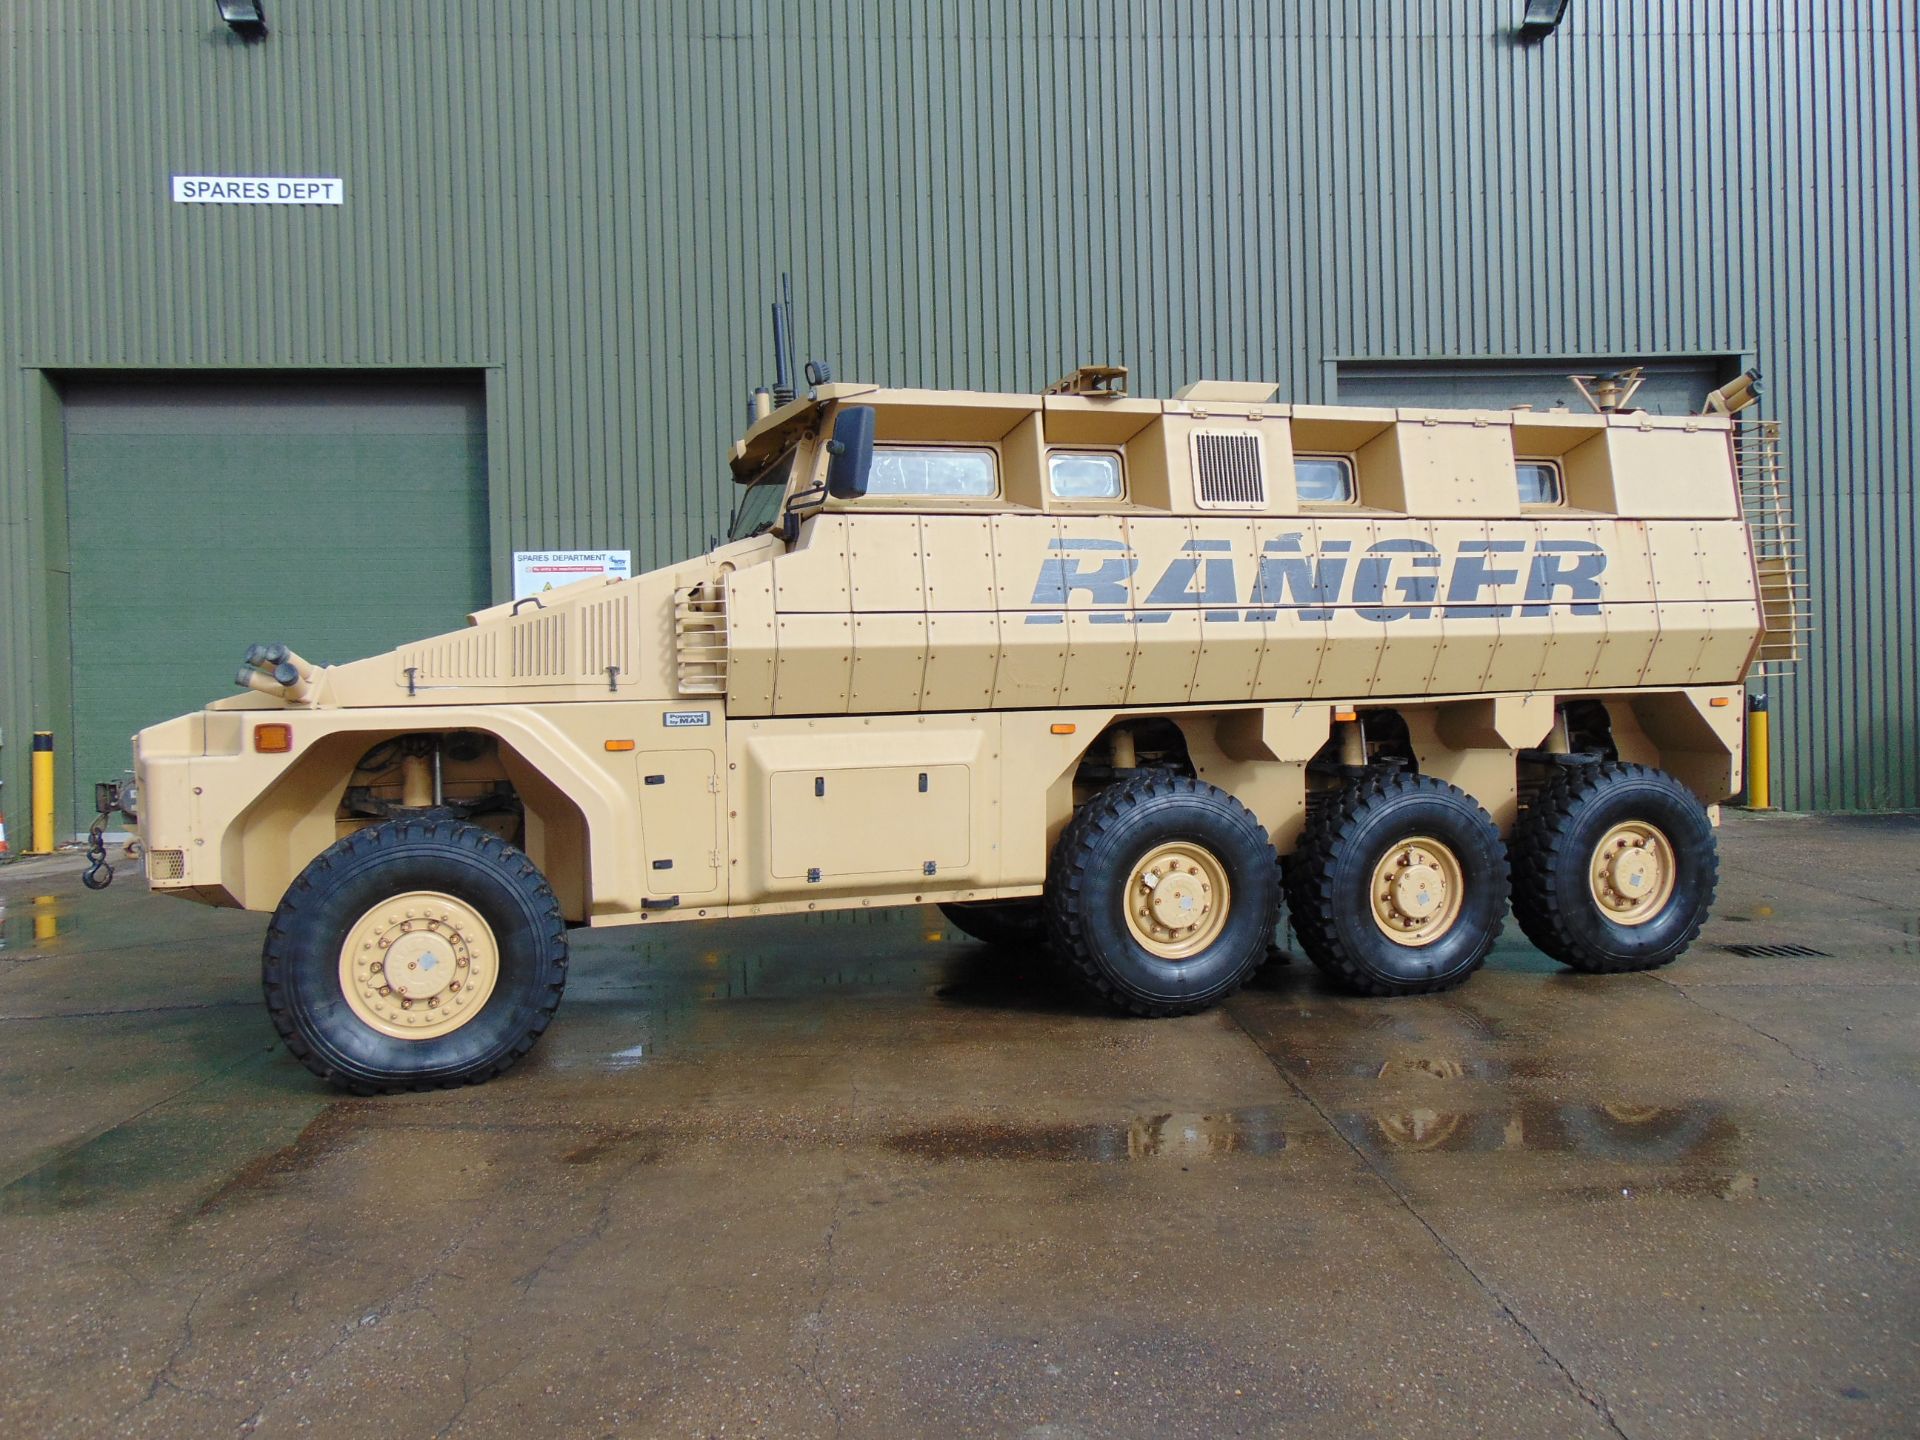 2012 RANGER 8x8 Armoured Personnel Carrier ONLY 1,354 MILES!